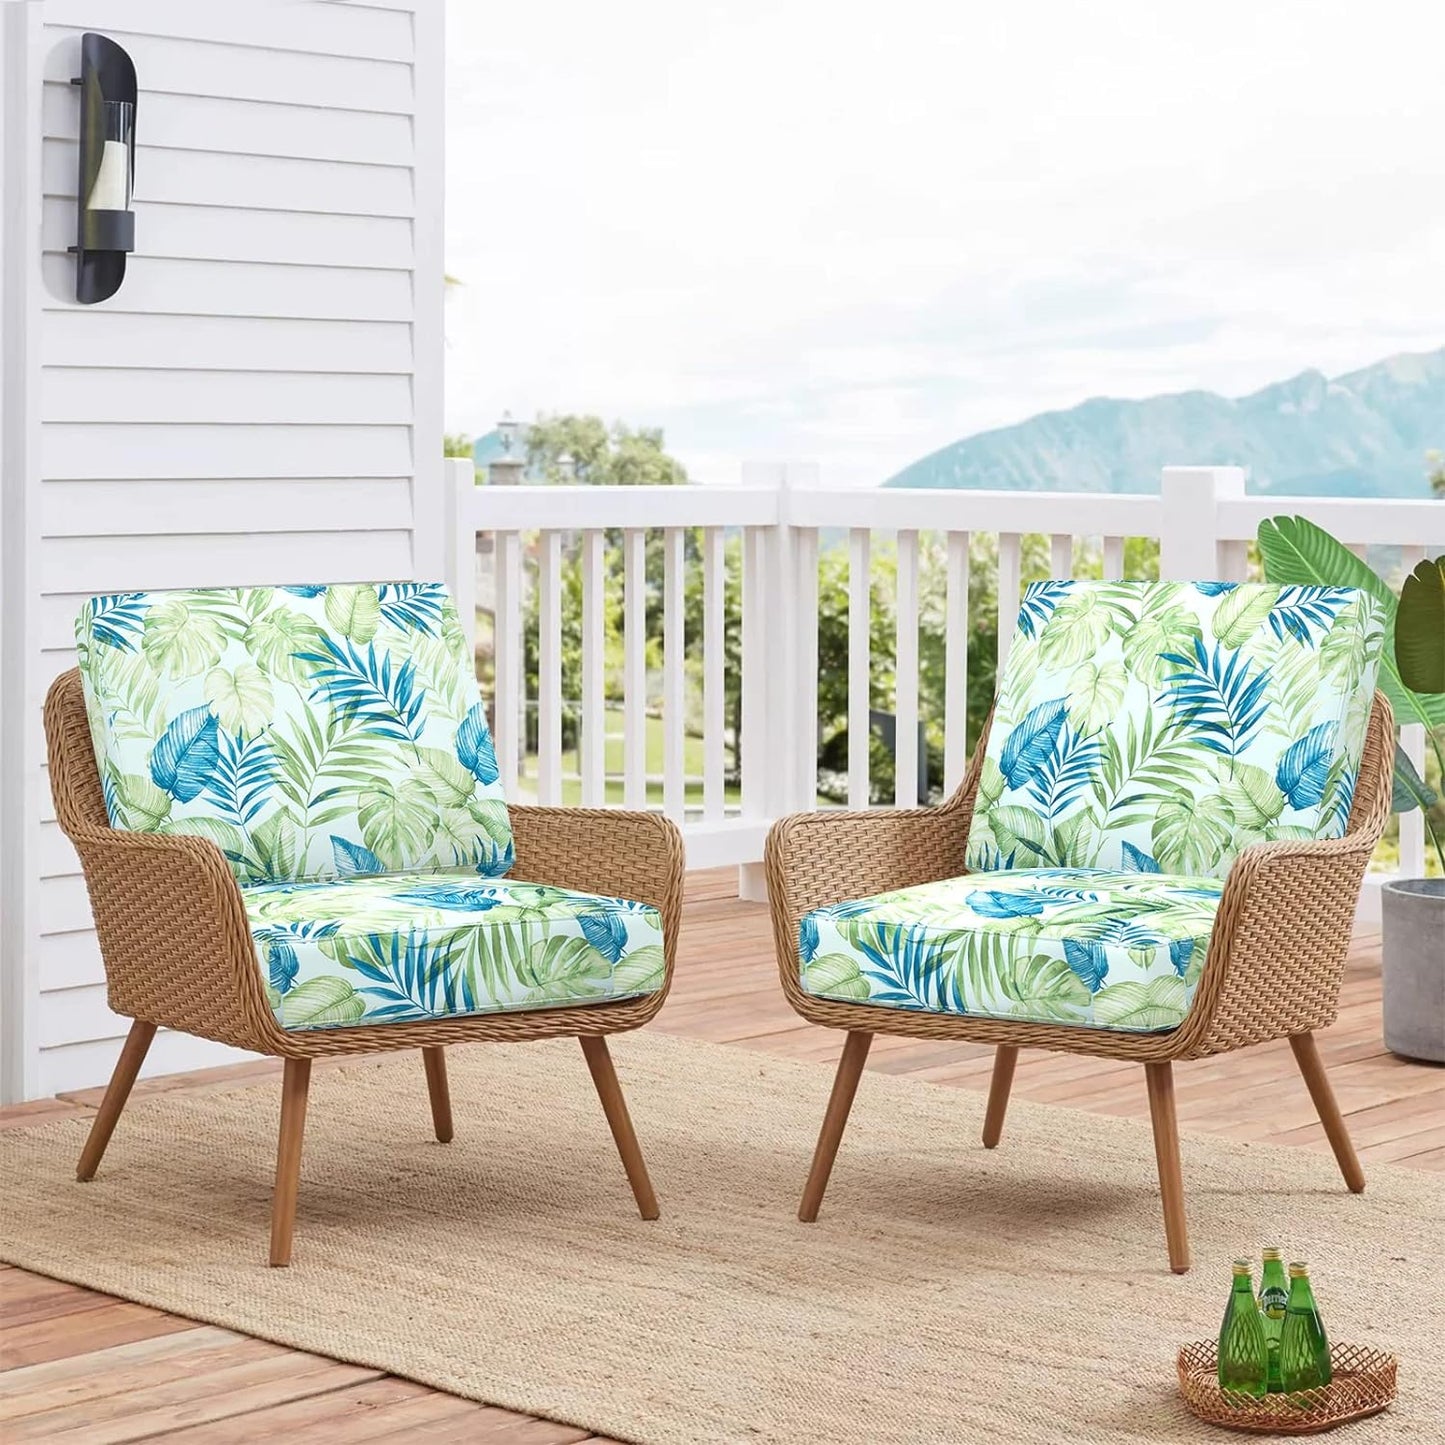 Sunlit Outdoor Cushion Covers, Replacement Cover Only, 4 Pack Water-Repellent Patio Chair Seat Slipcovers with Zipper and Tie, 22" x 20" x 4", Tropical Leaf, Green